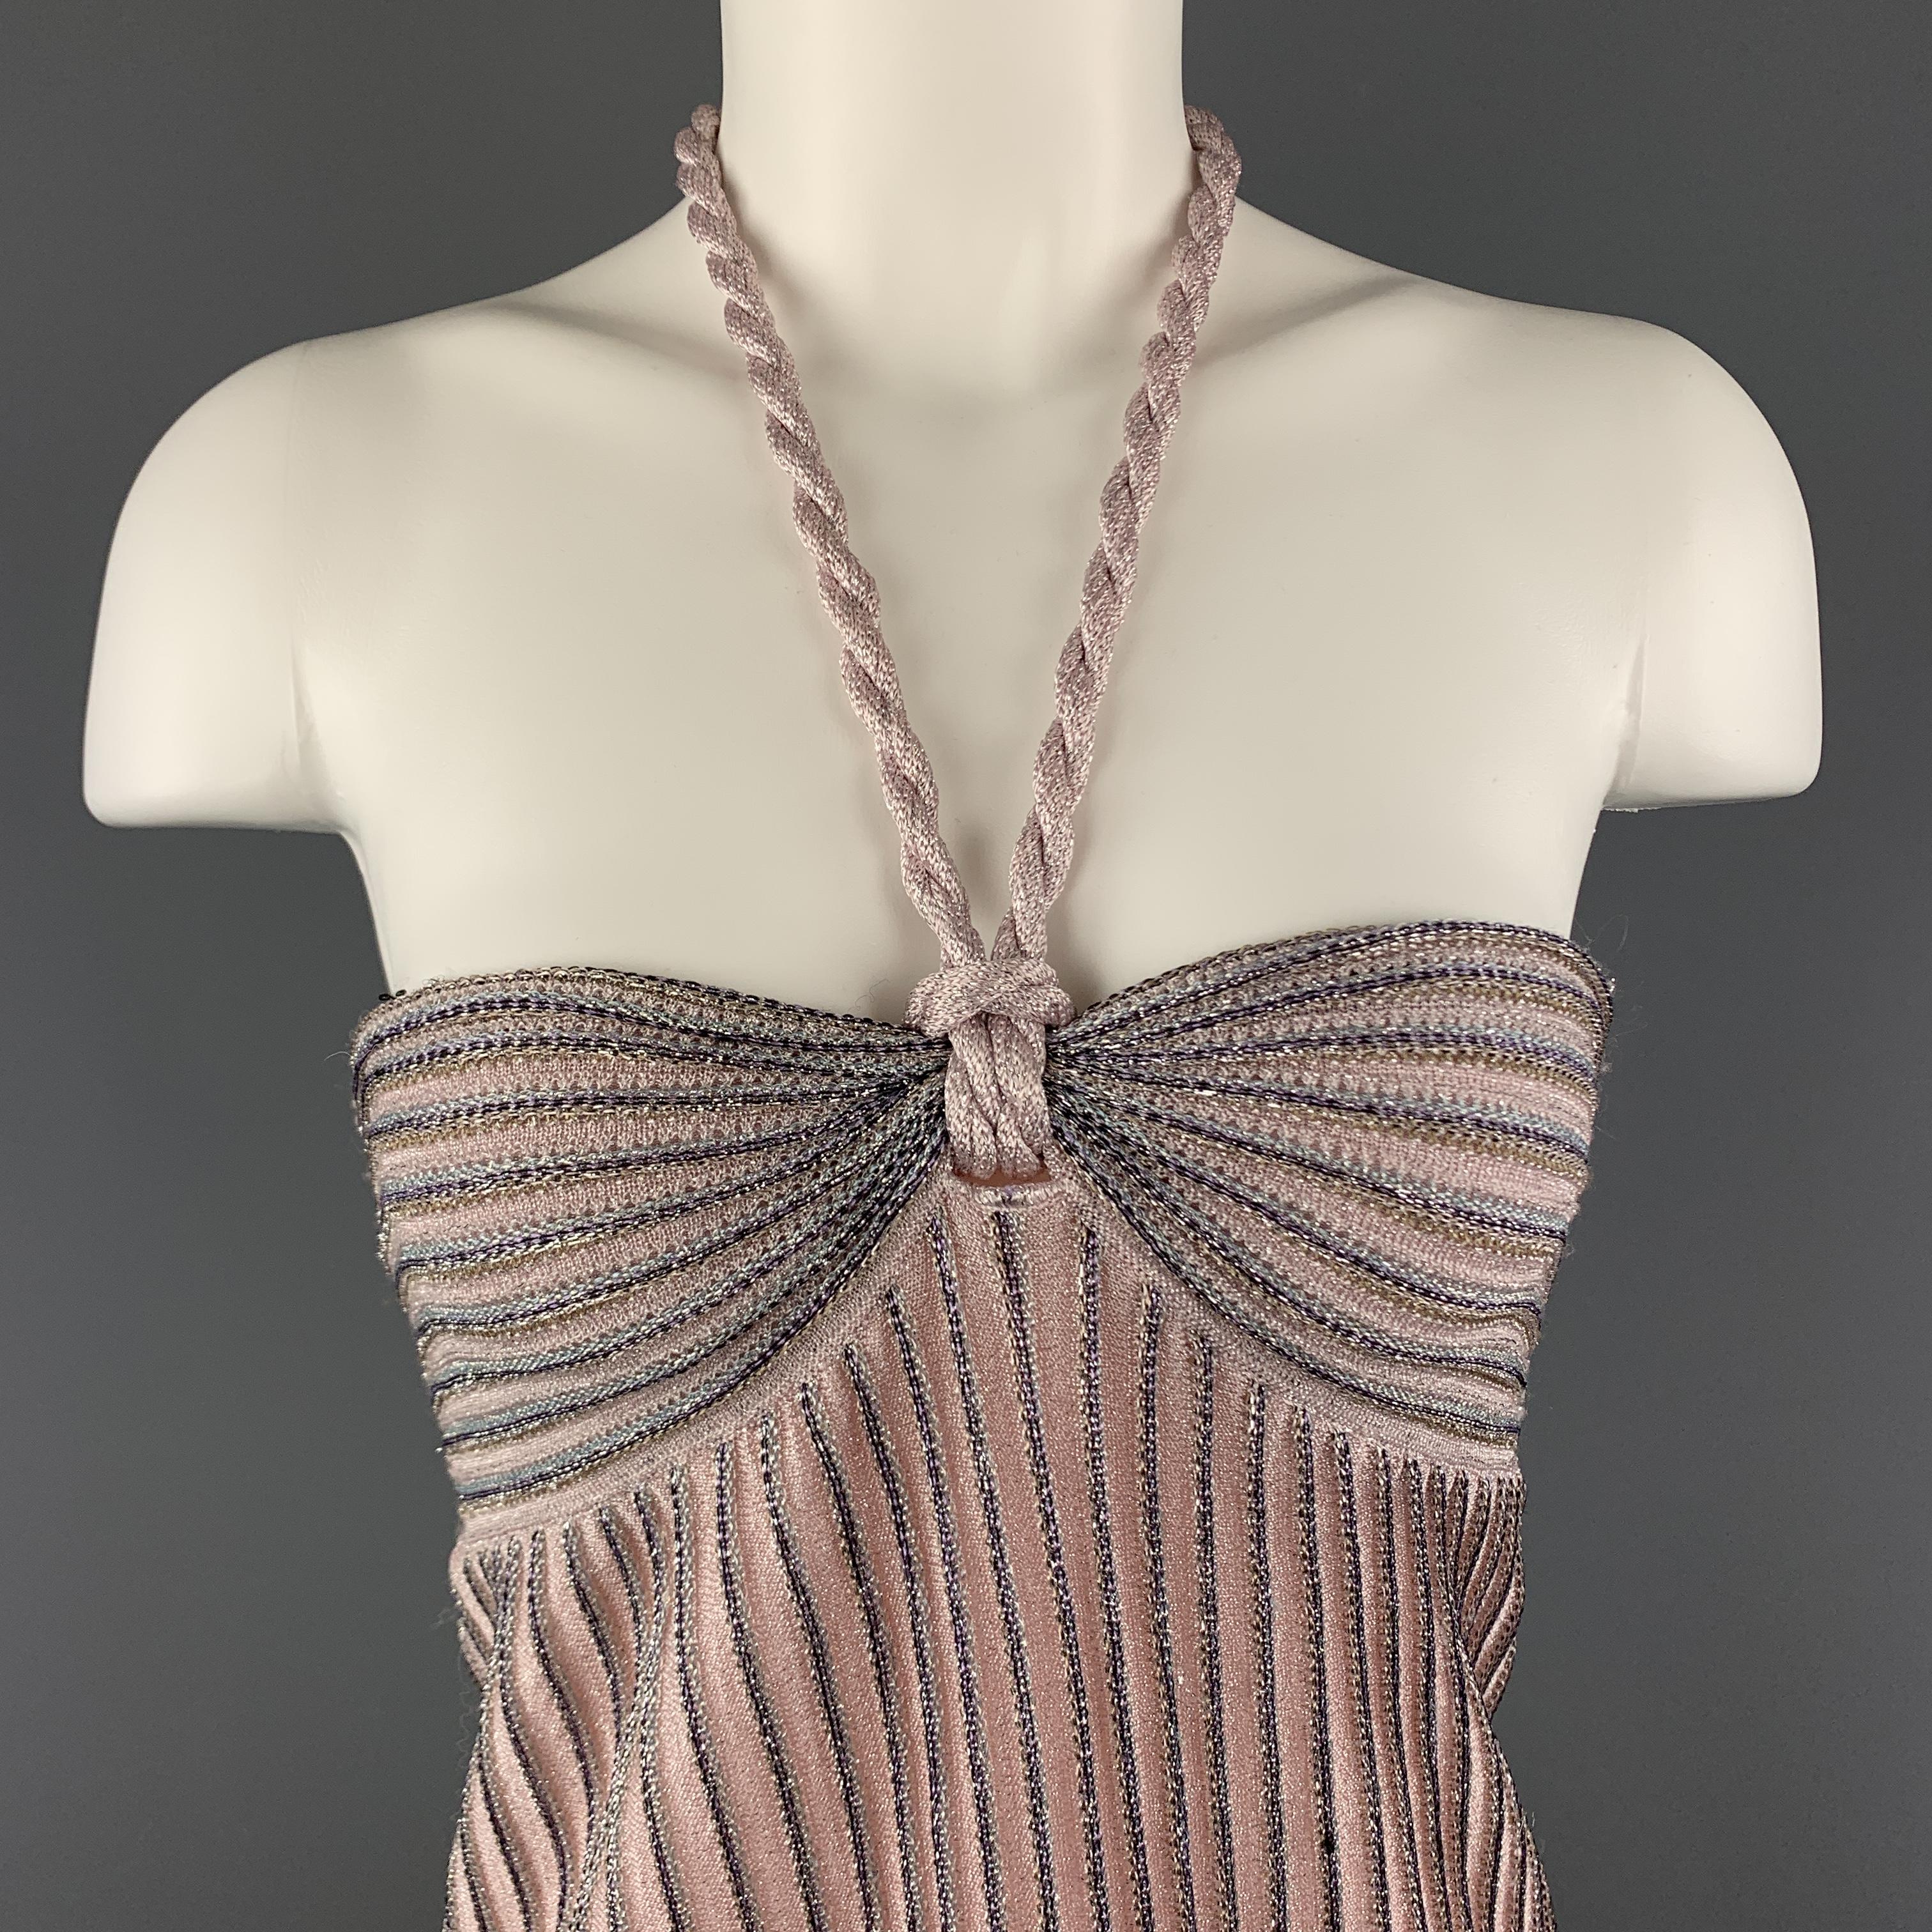 MISSONI mini dress comes in metallic light pink sparkle knit with an A line textured silhouette, striped bra top, and tied rope halter top. Made in Italy.

Excellent Pre-Owned Condition.
Marked: IT 38

Measurements:

Bust: 30
Waist: 32 in.
Length: